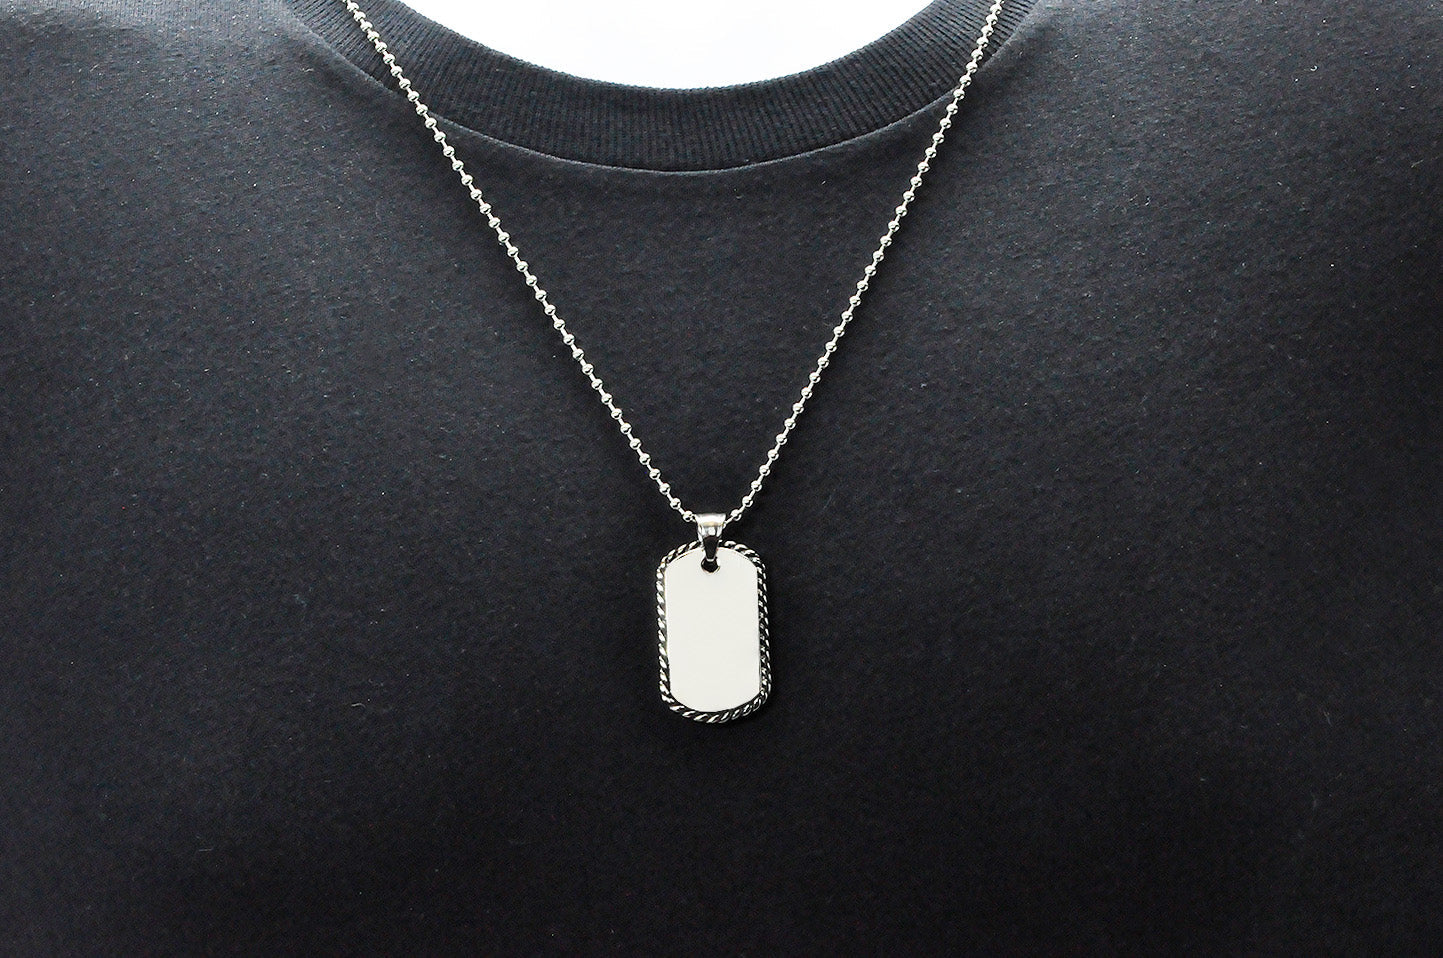 Men's Stainless Steel Black Ring Dog Tag Pendant Necklace w Bead